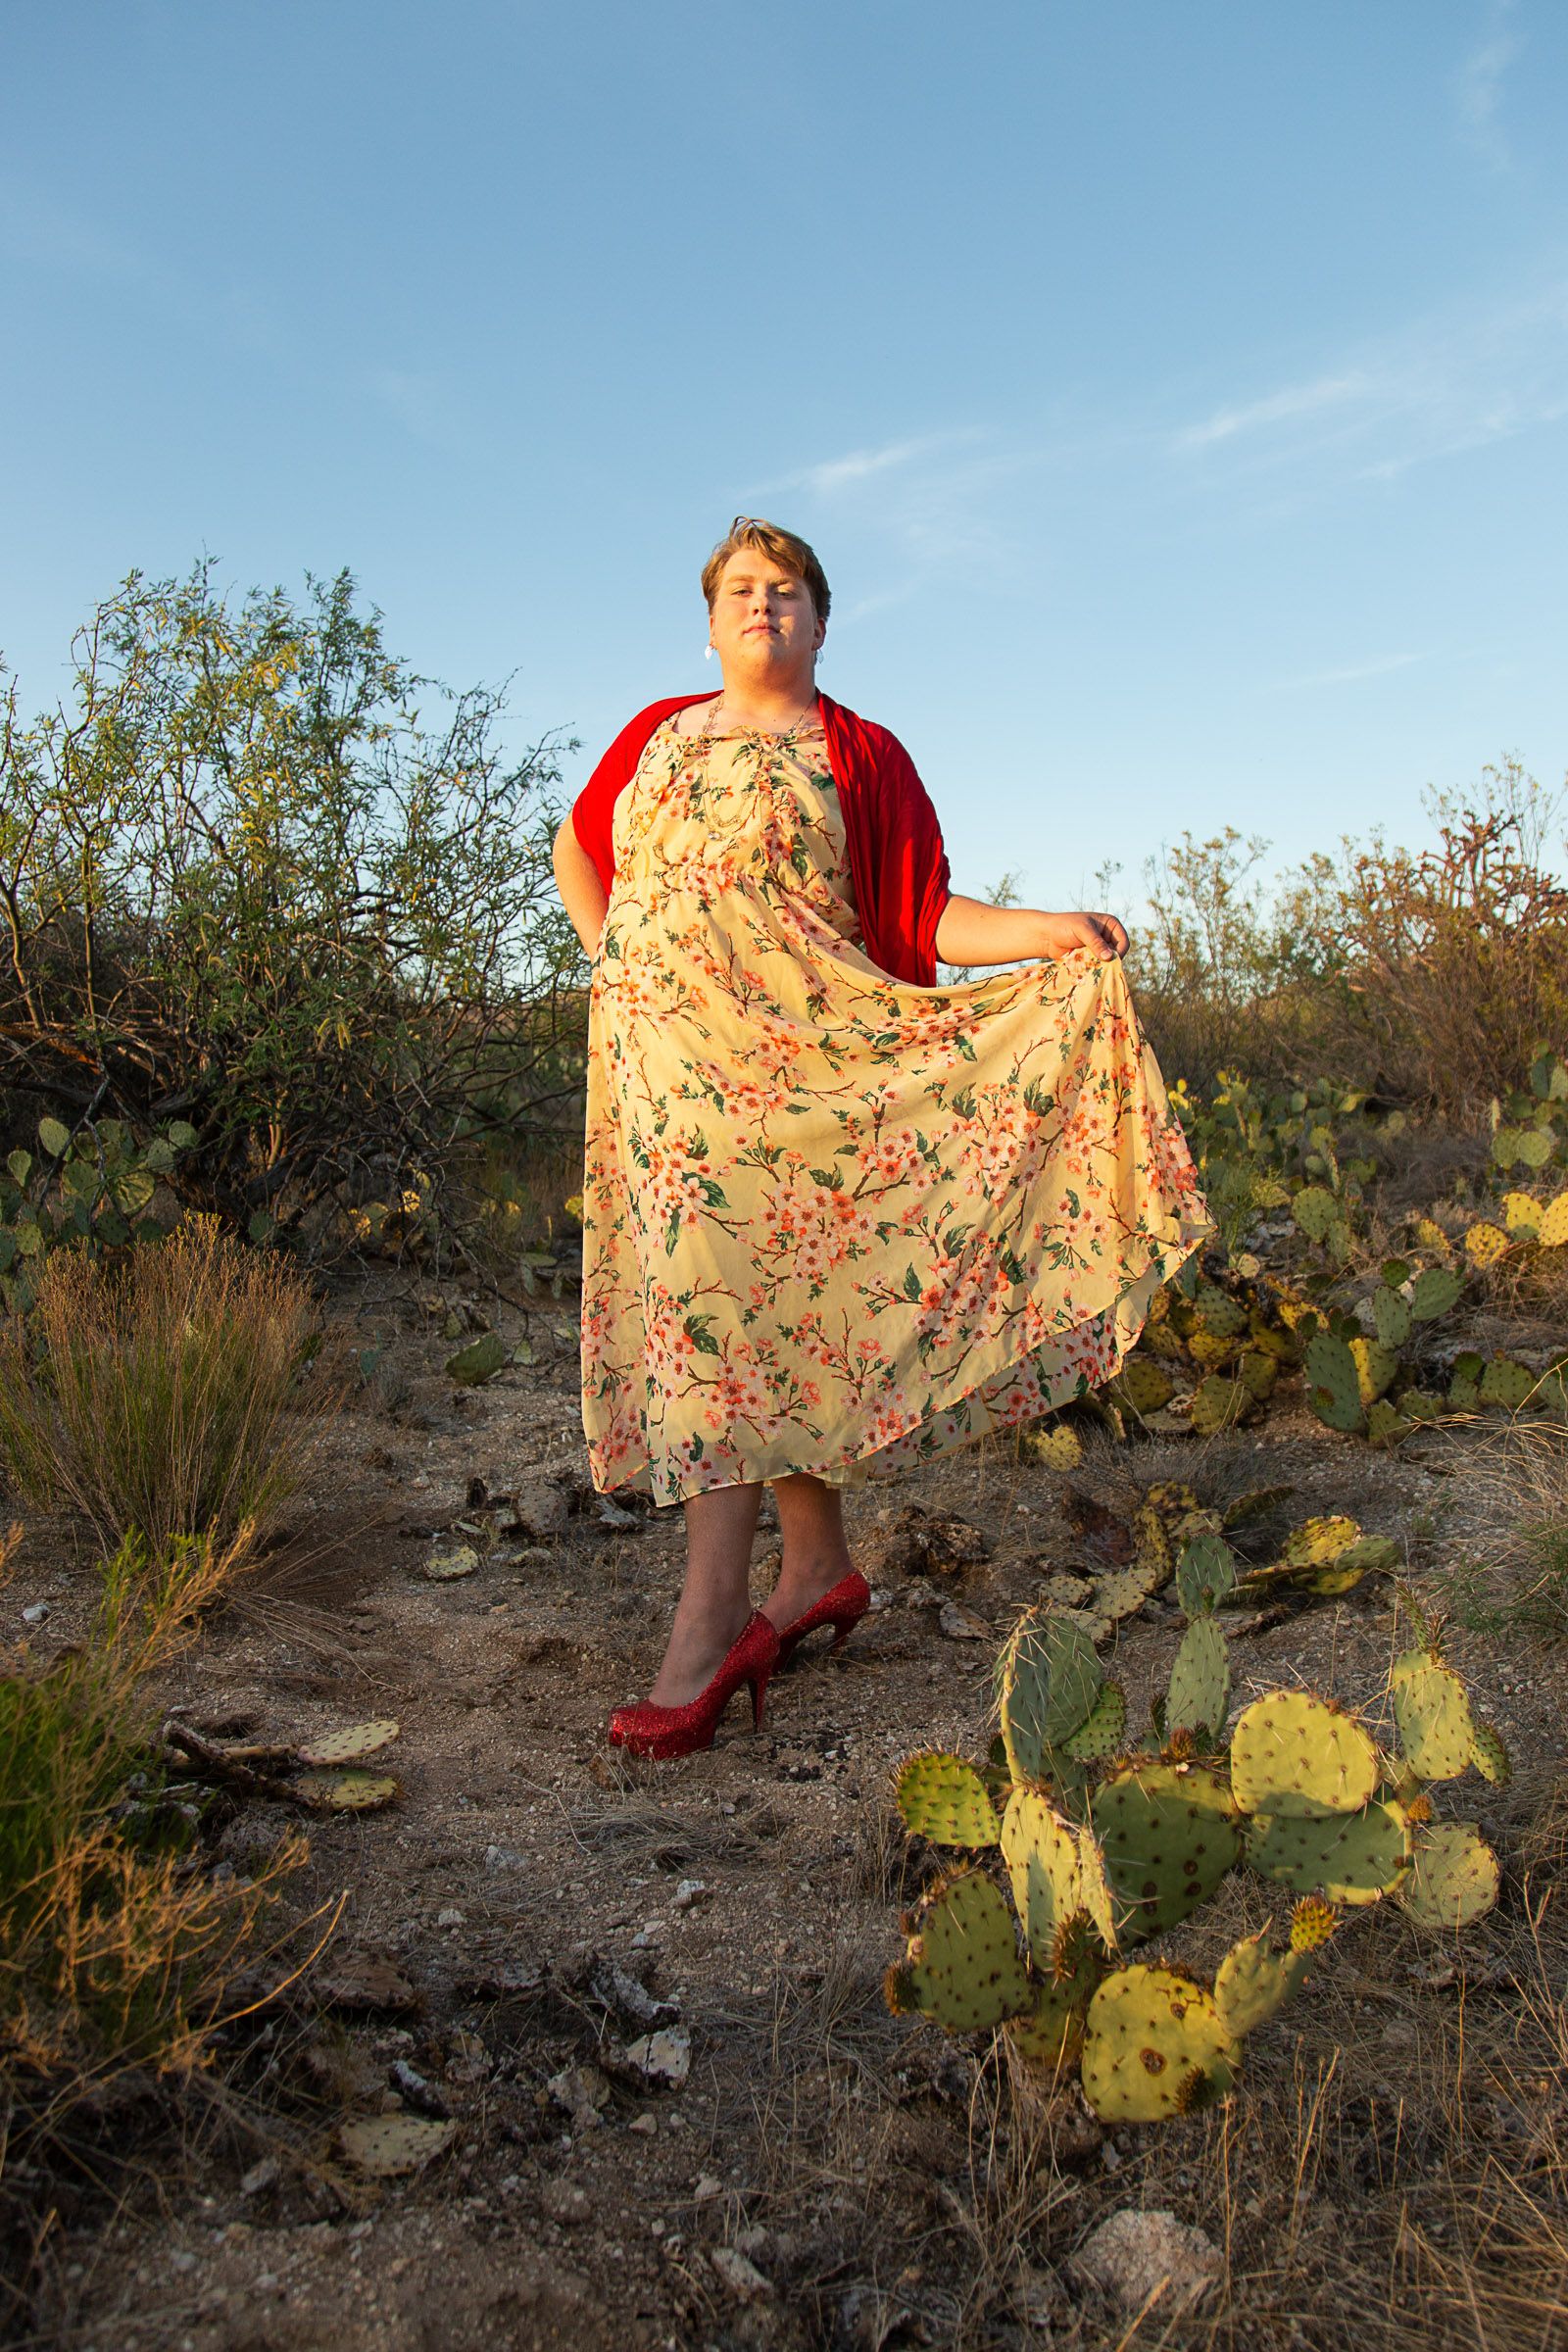 © Lindsay Morris - Stefi poses in a favorite dress and heels in the desert at sunset (2021).